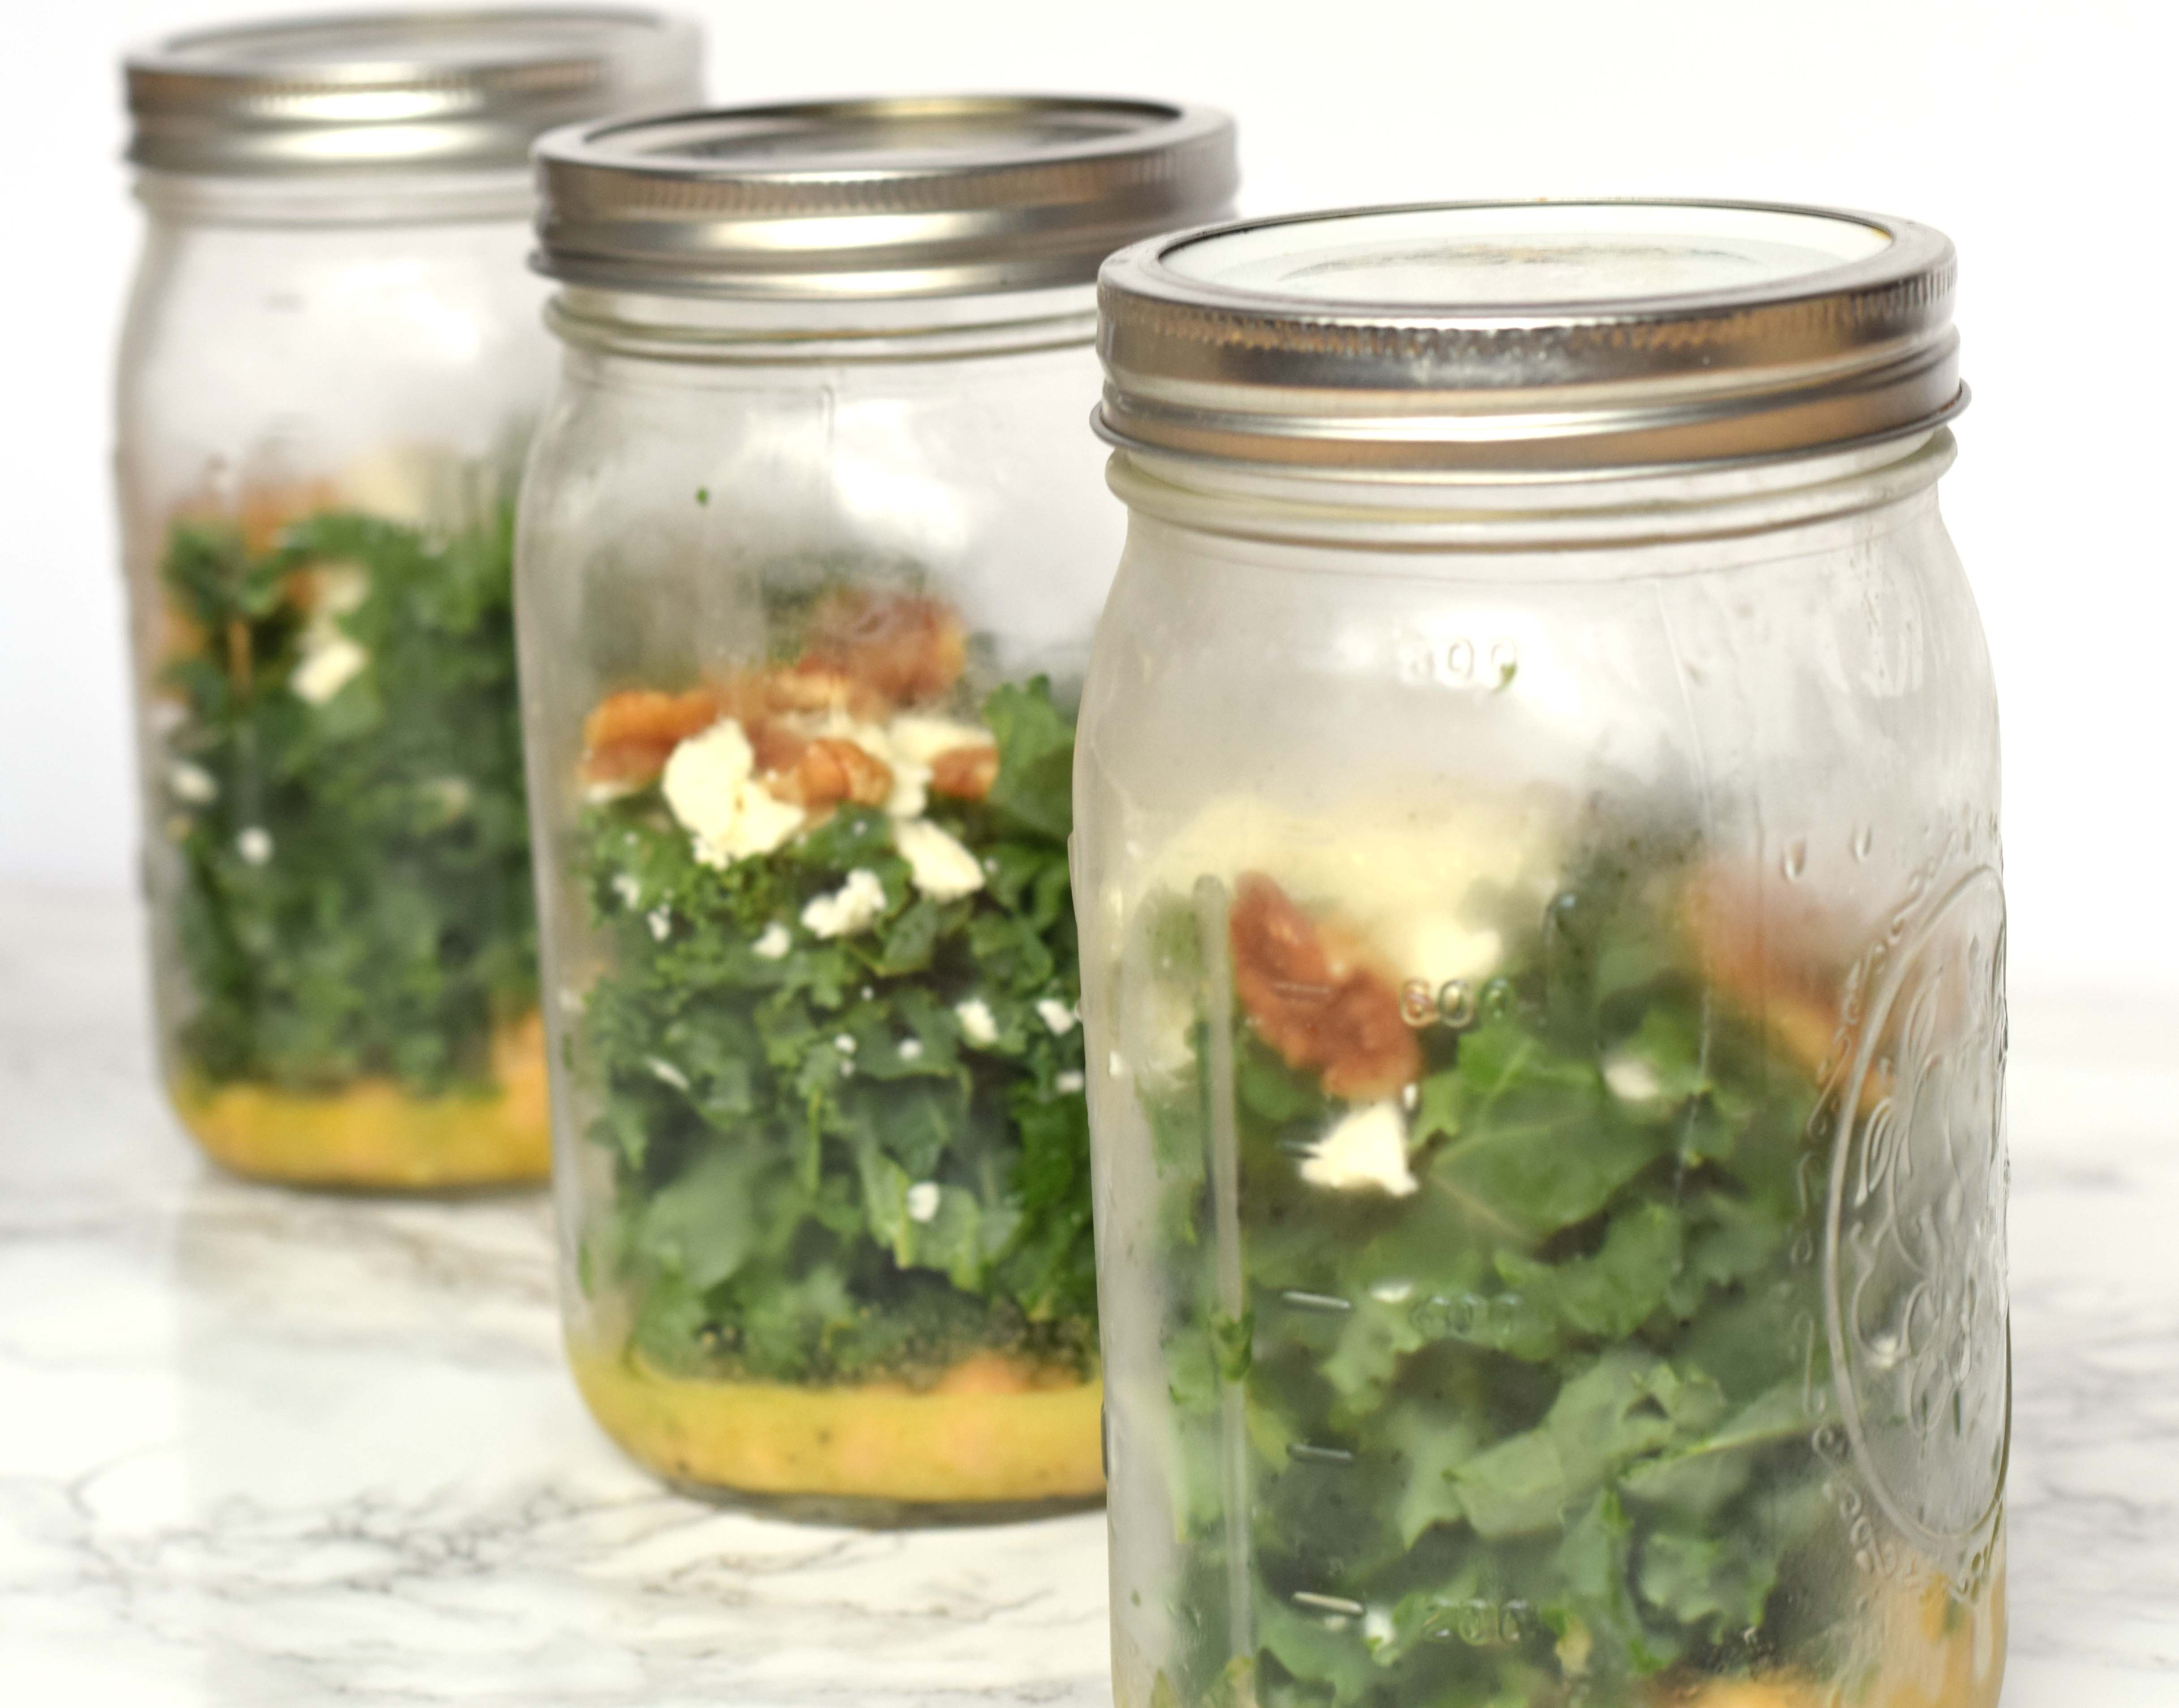 Kale Feta Meal Prep Mason Jar Salad - Cooking With a Full Plate